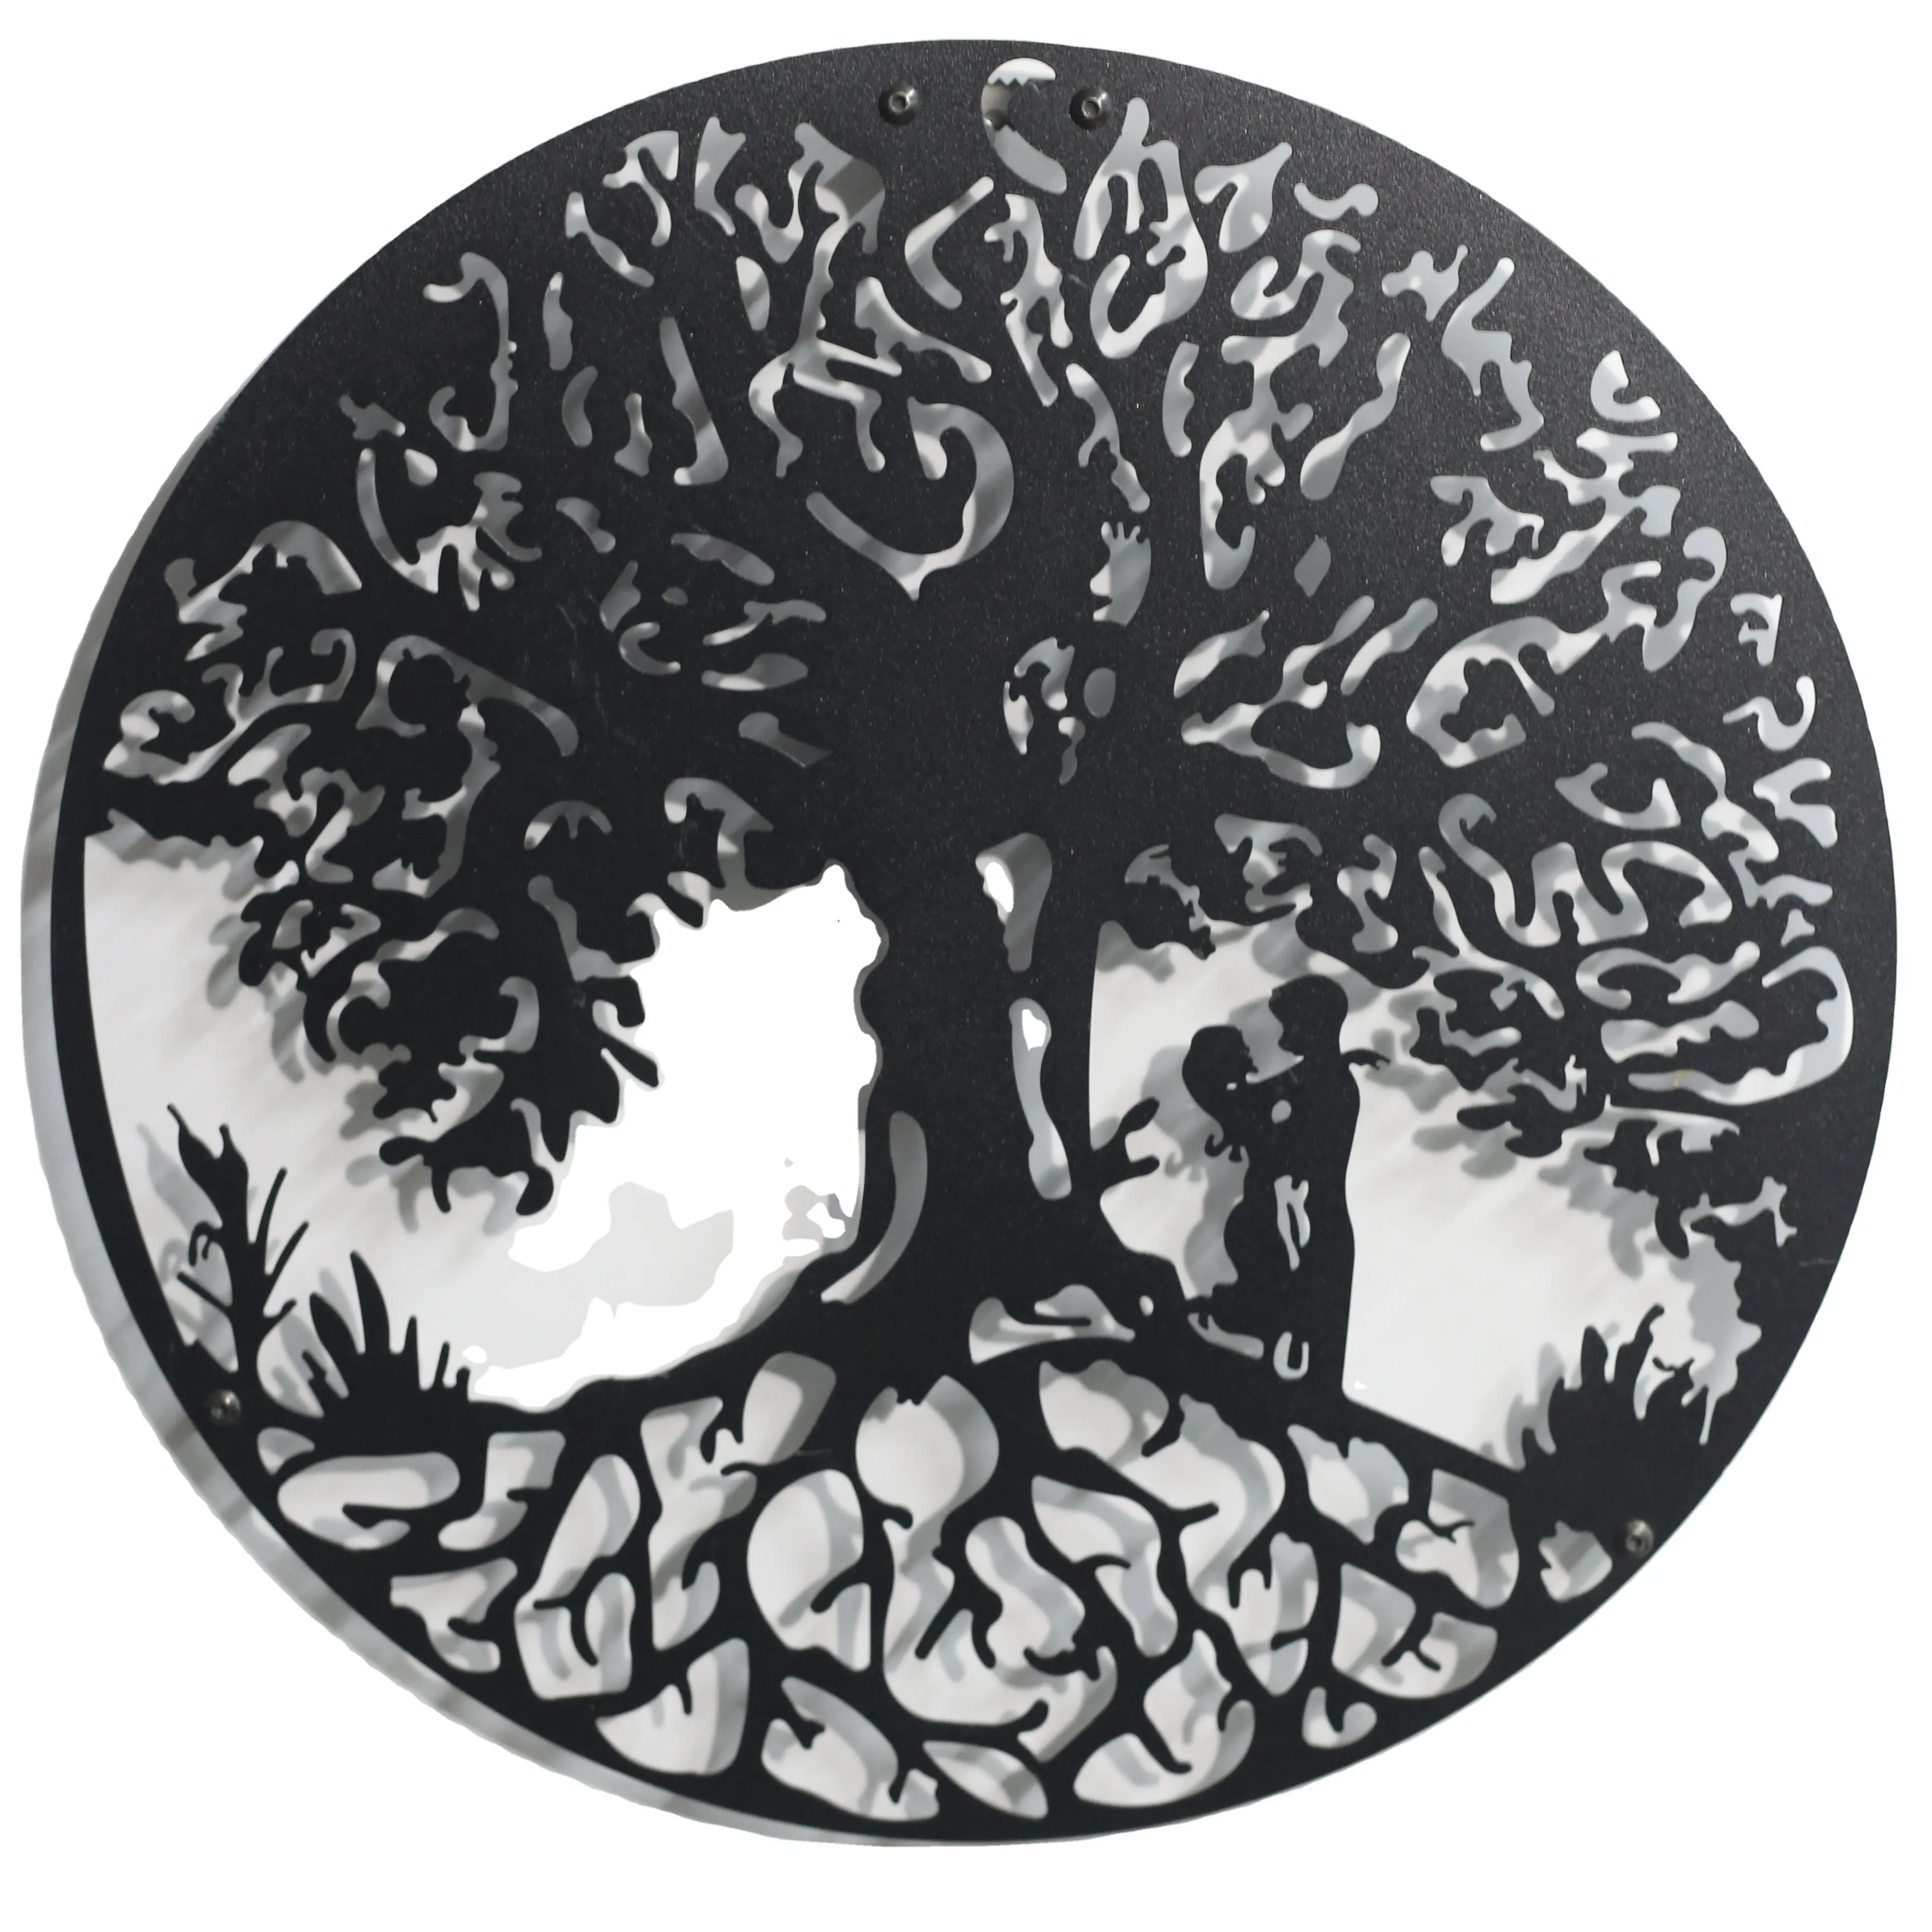 Metal Wall Art Tree High Quality Metal Wall Hangings Decor Wholesale Best Price Metal Wall High Quality Home Art Decor Products